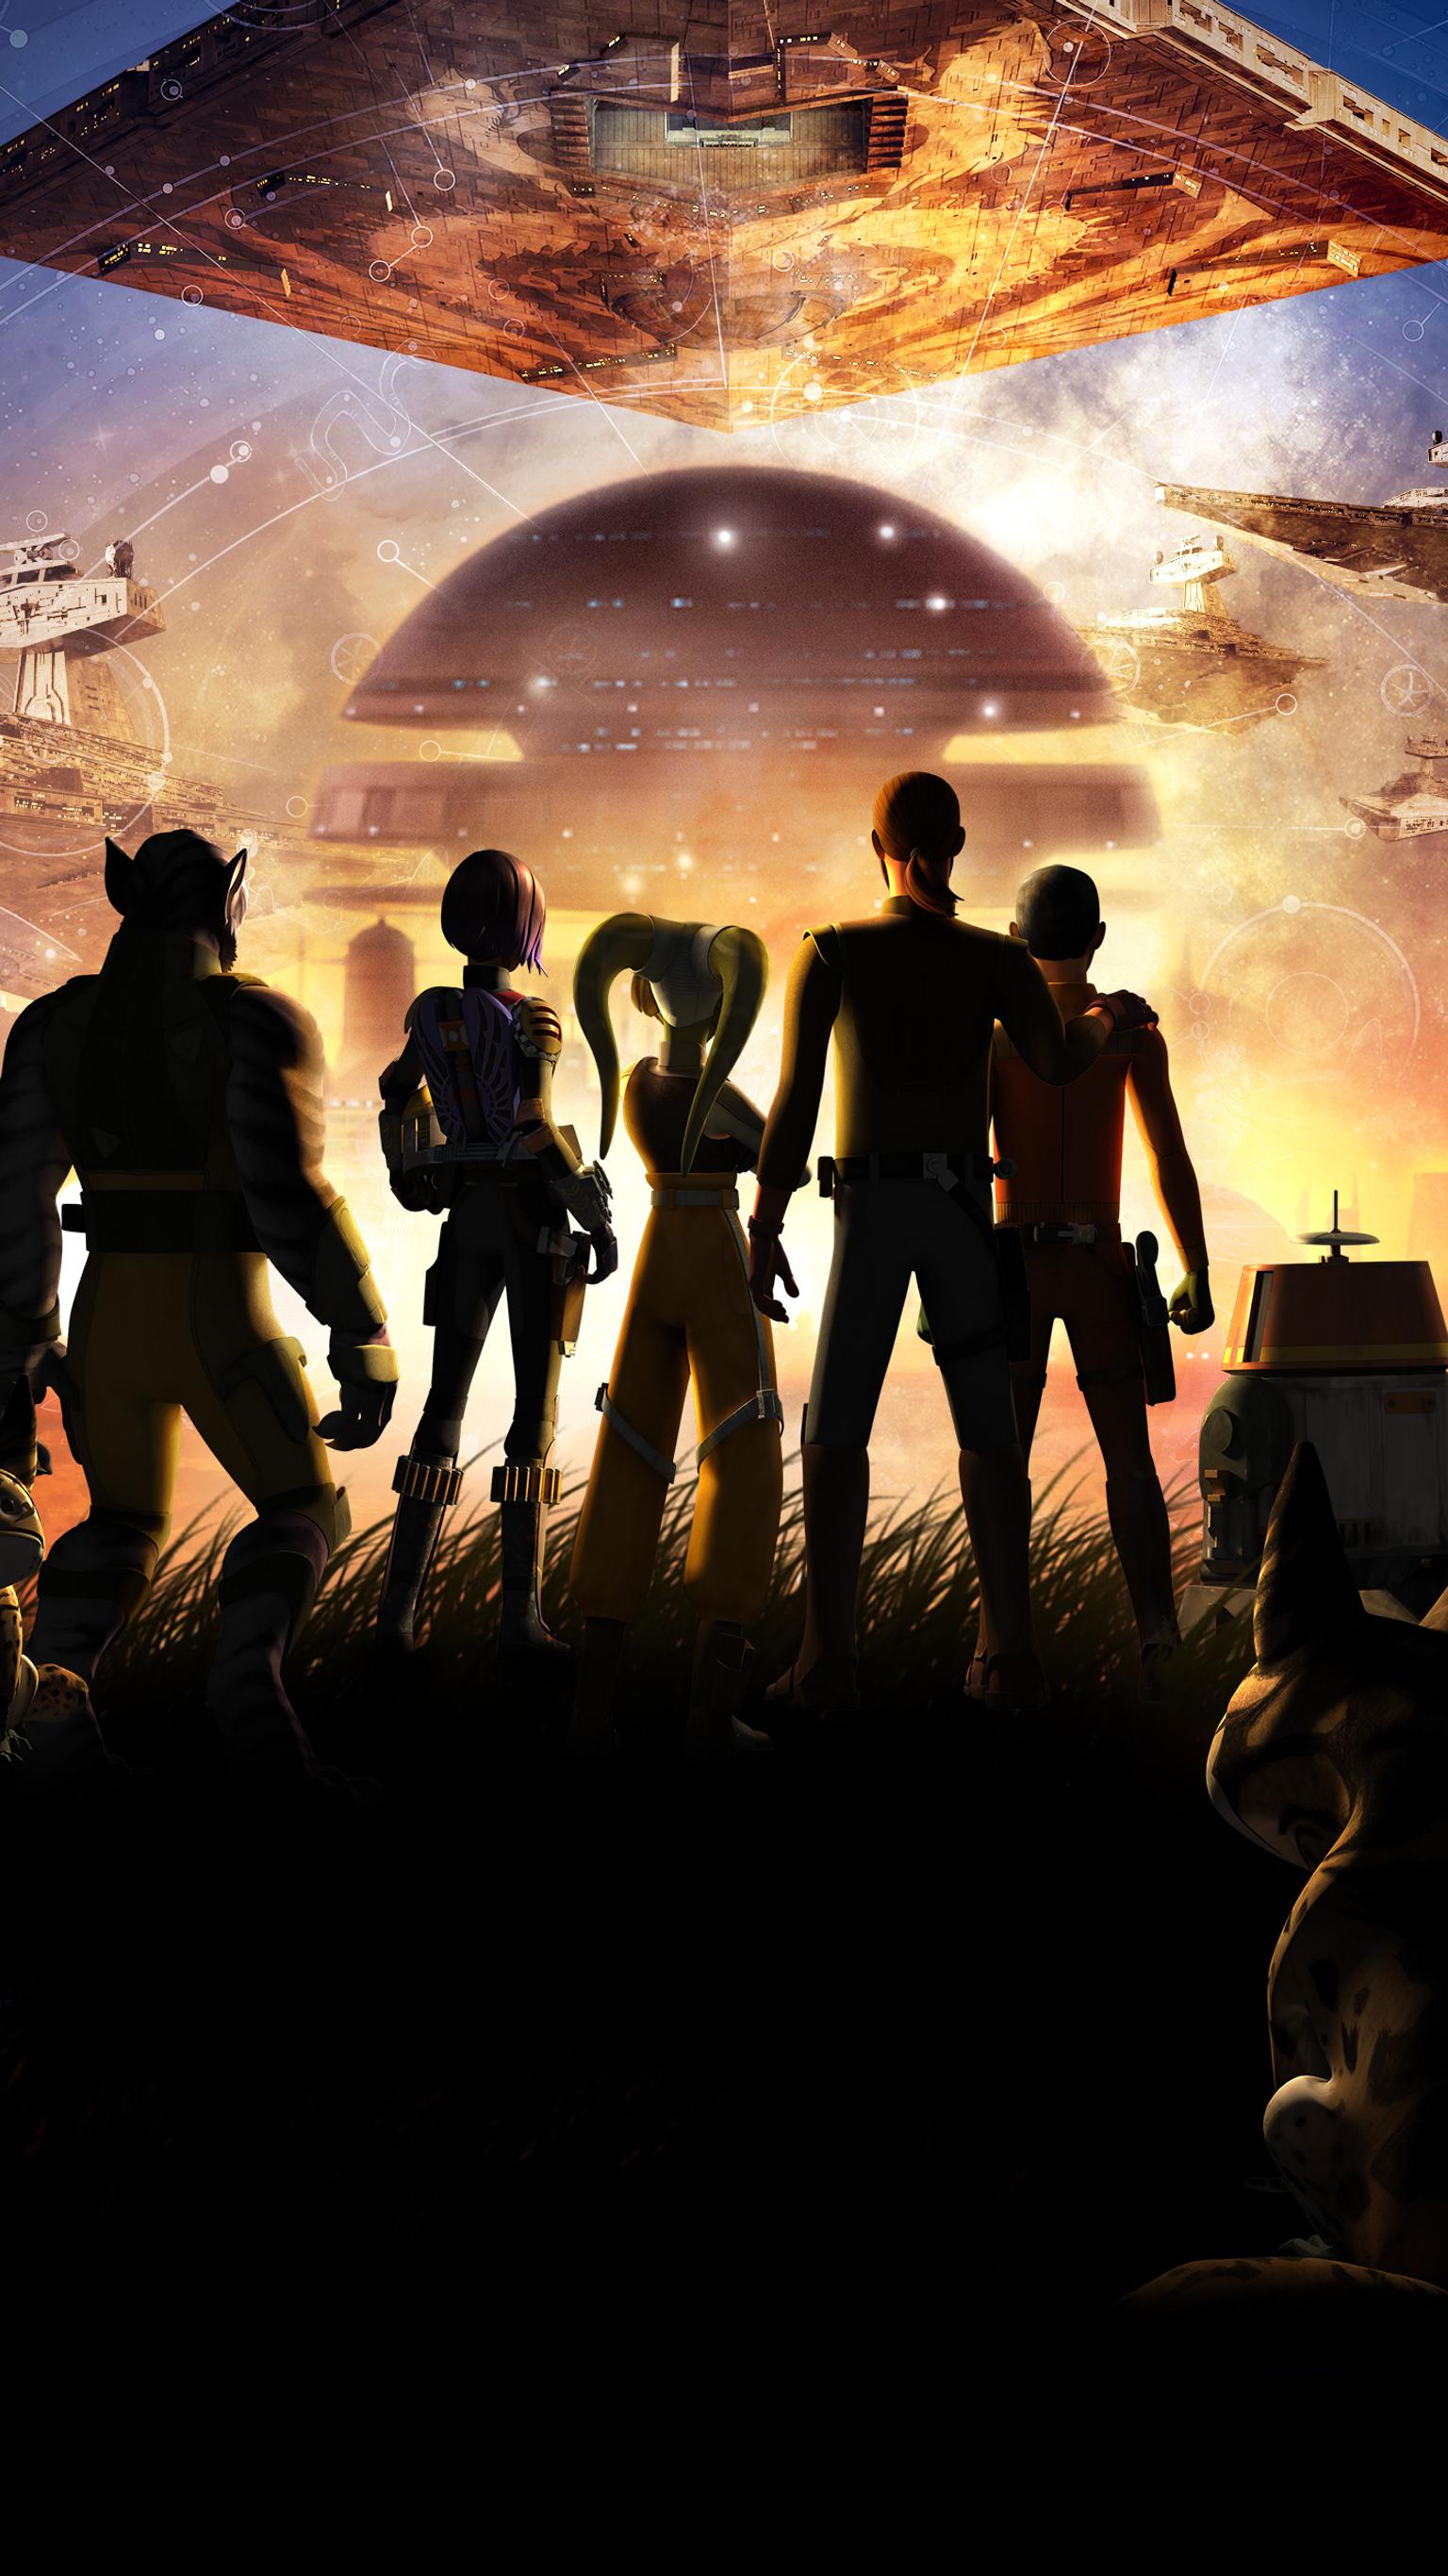 star wars rebels wallpaper,sky,poster,movie,action adventure game,fictional character